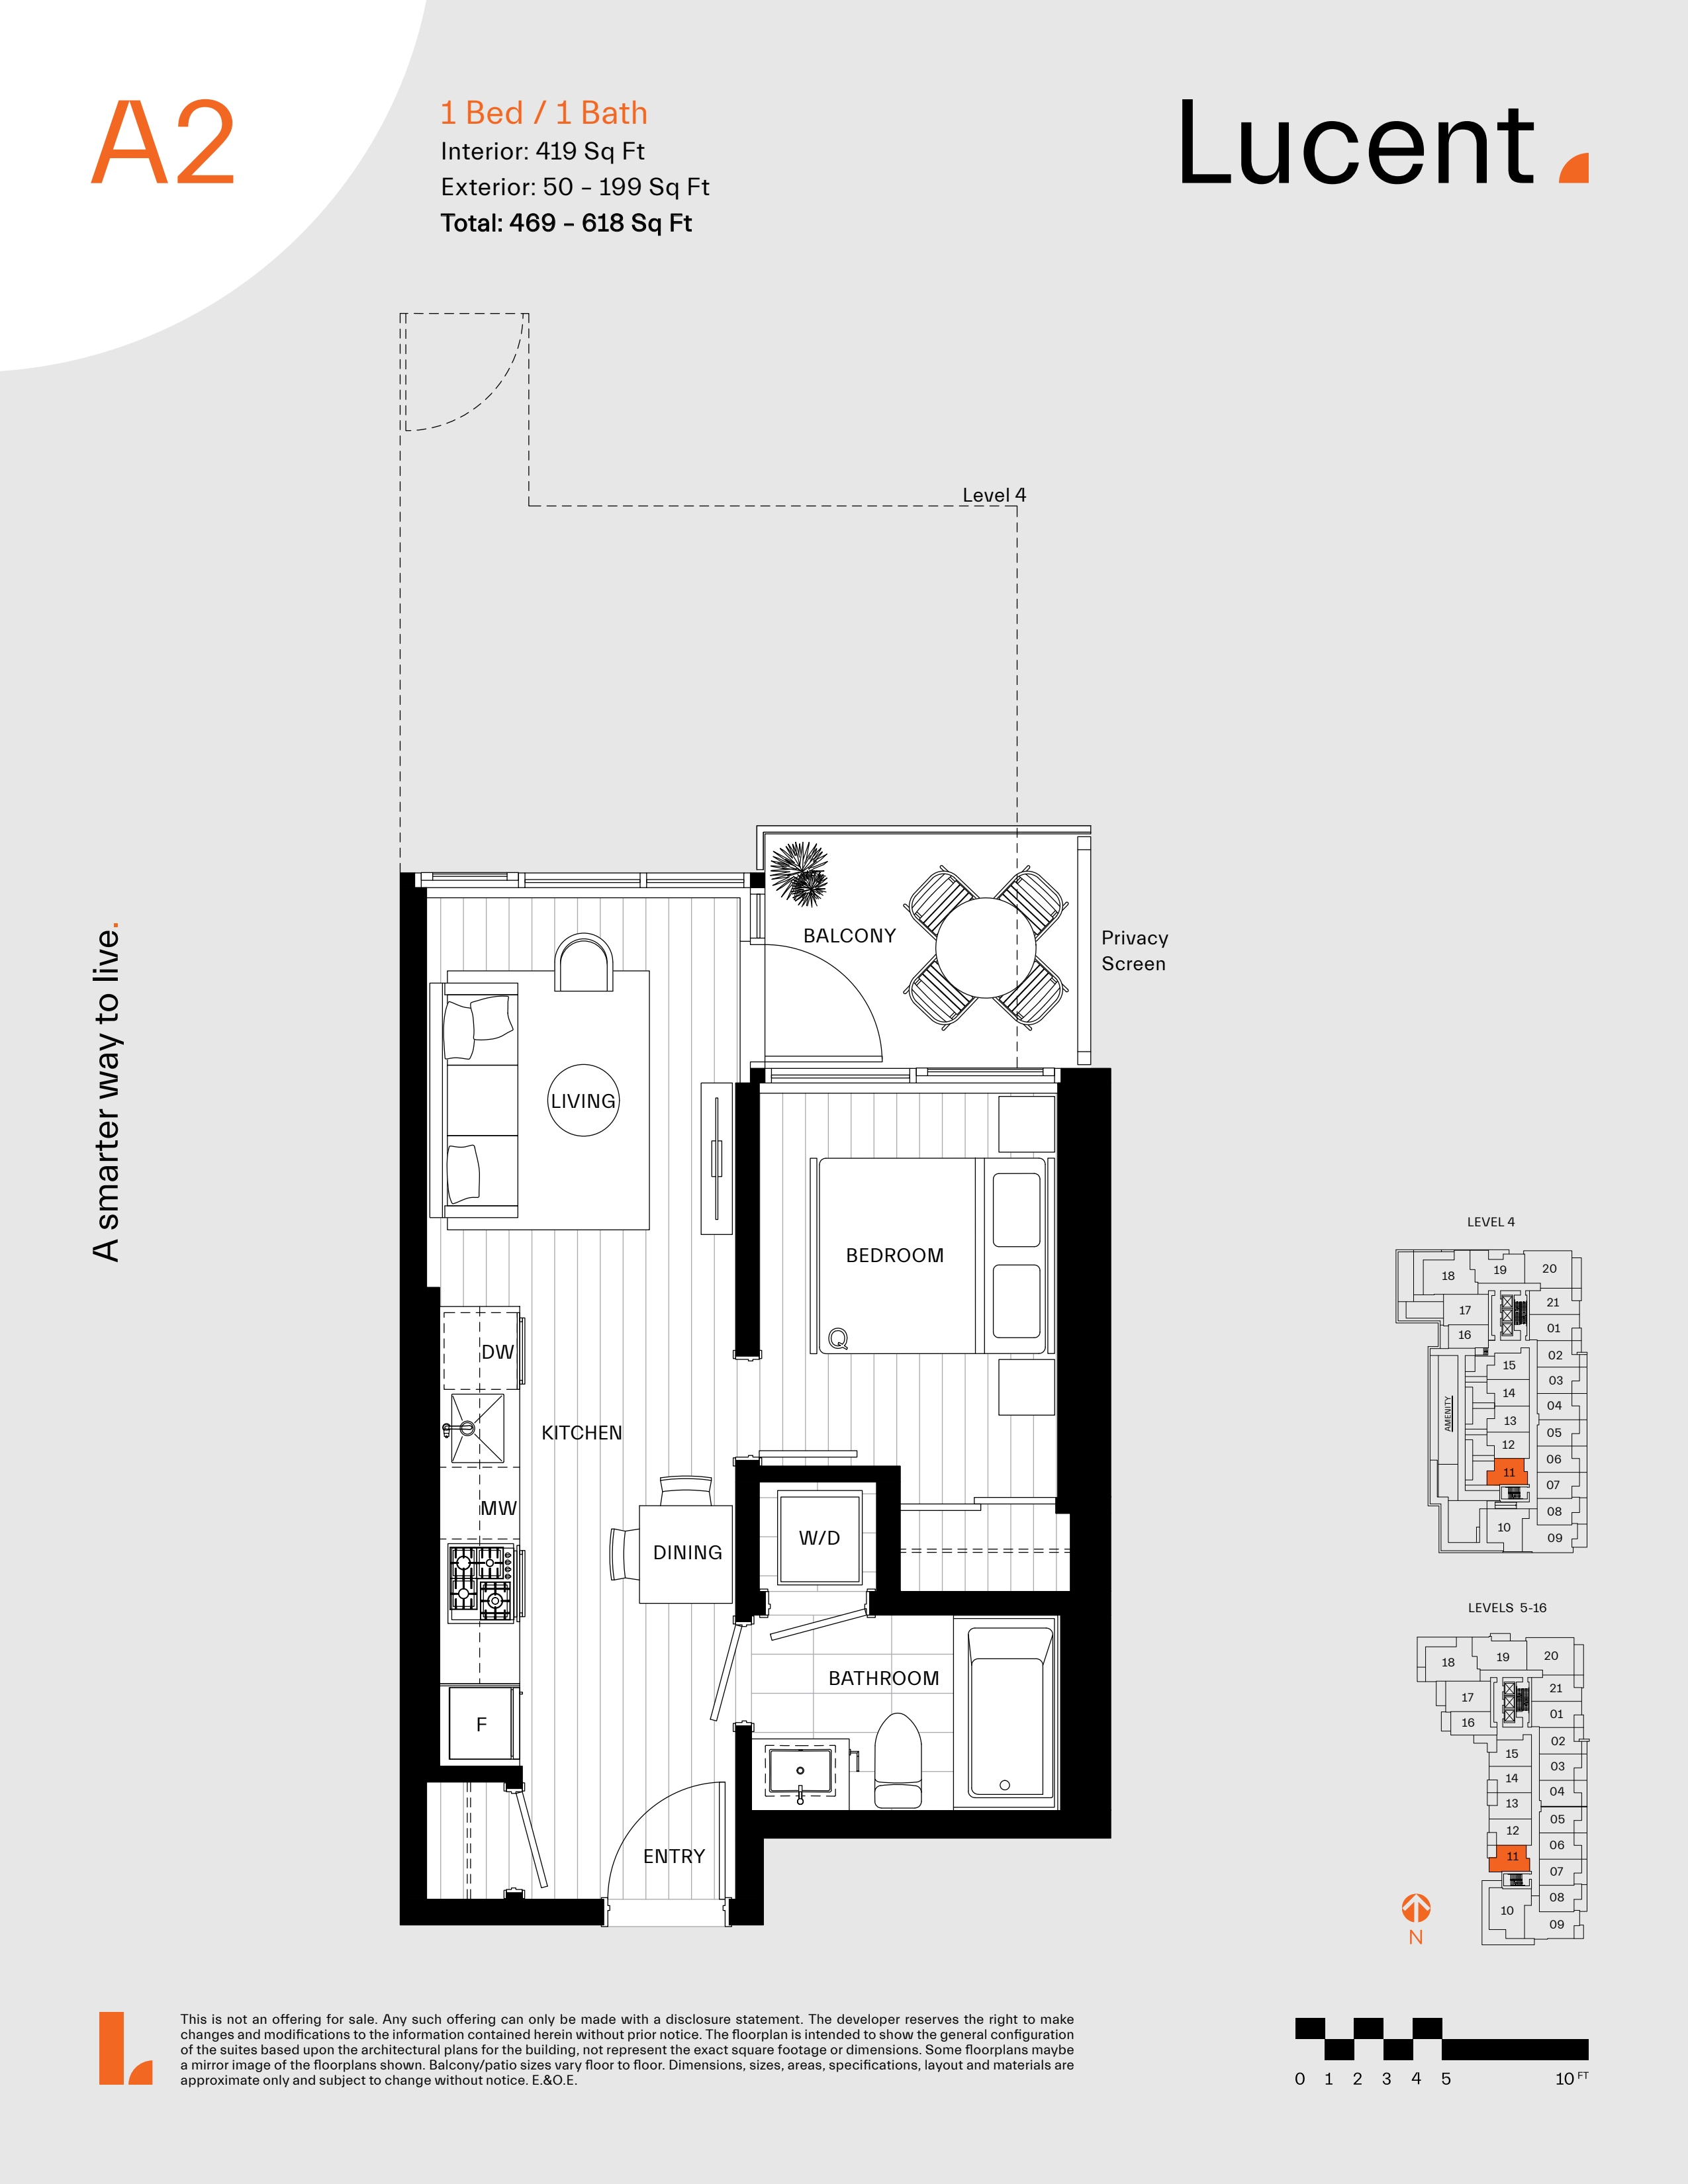 A2 Floor Plan of Lucent Condos with undefined beds